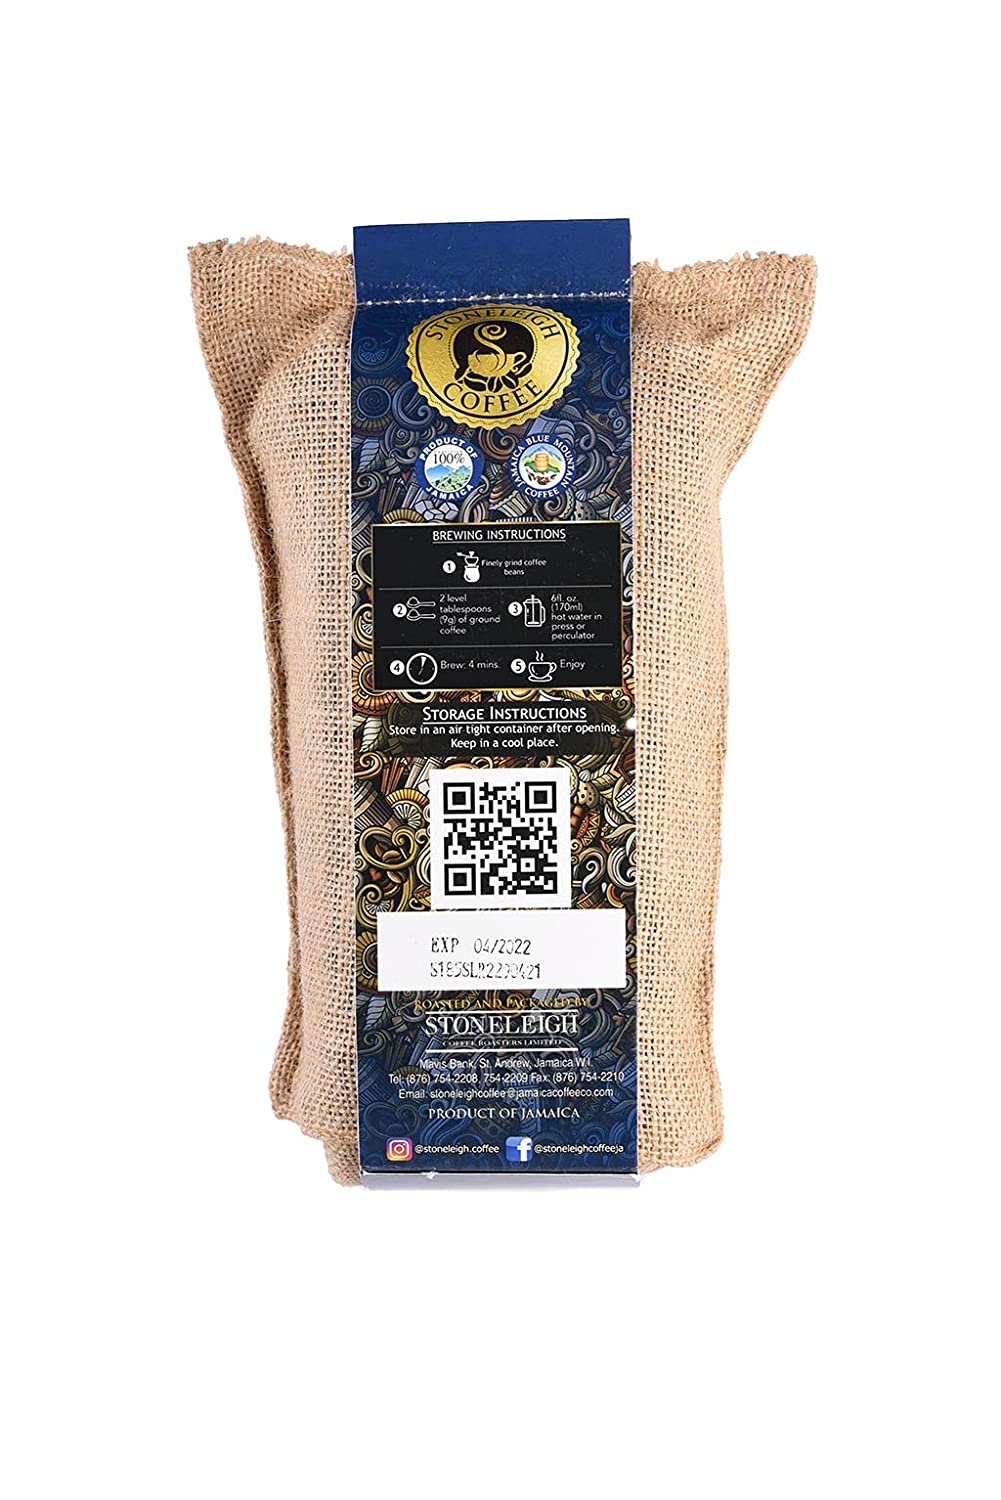 Stoneleigh Coffee – Five Pack (5) Premium 100% Grade A Jamaica Blue Mountain Coffee Roasted Beans - 16Ozs – Genuine Jamaican Product - Traditional Jamaican Crocus (Burlap) Bag Packed Ideal for Gifting